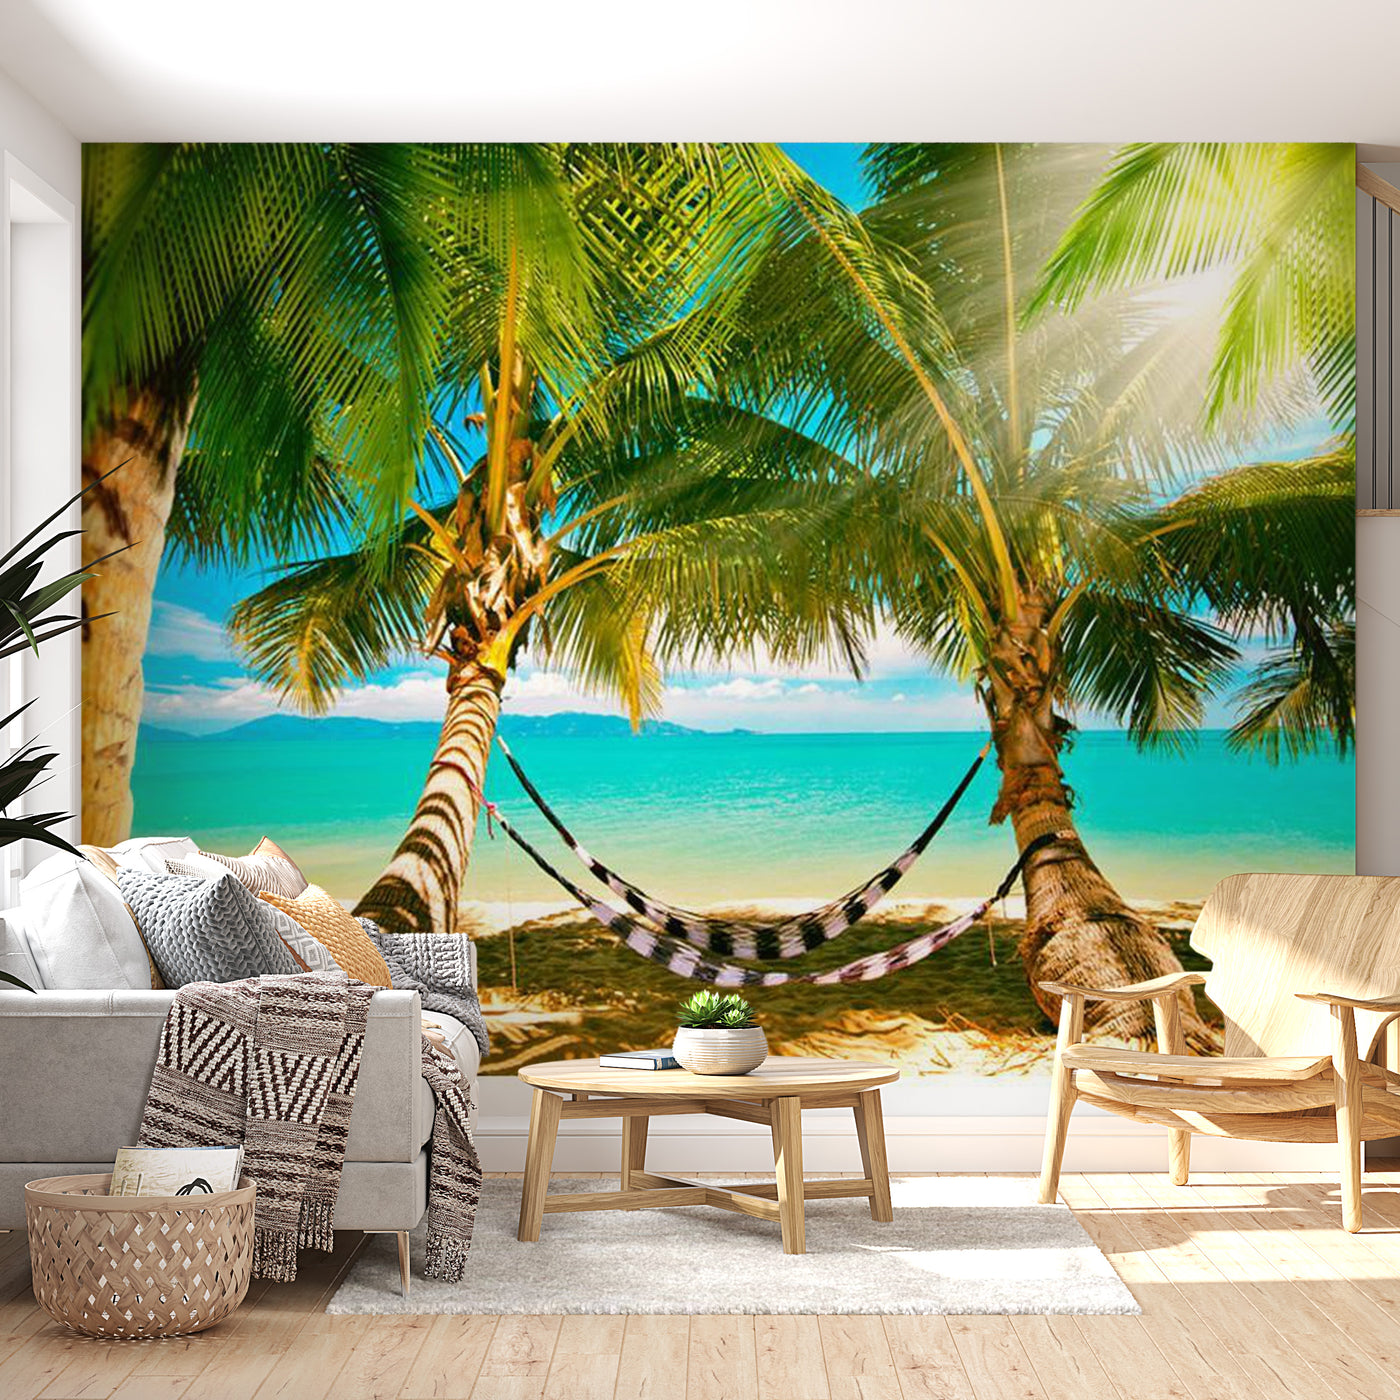 Peel & Stick Beach Wall Mural - Sunny Duo - Removable Wall Decals